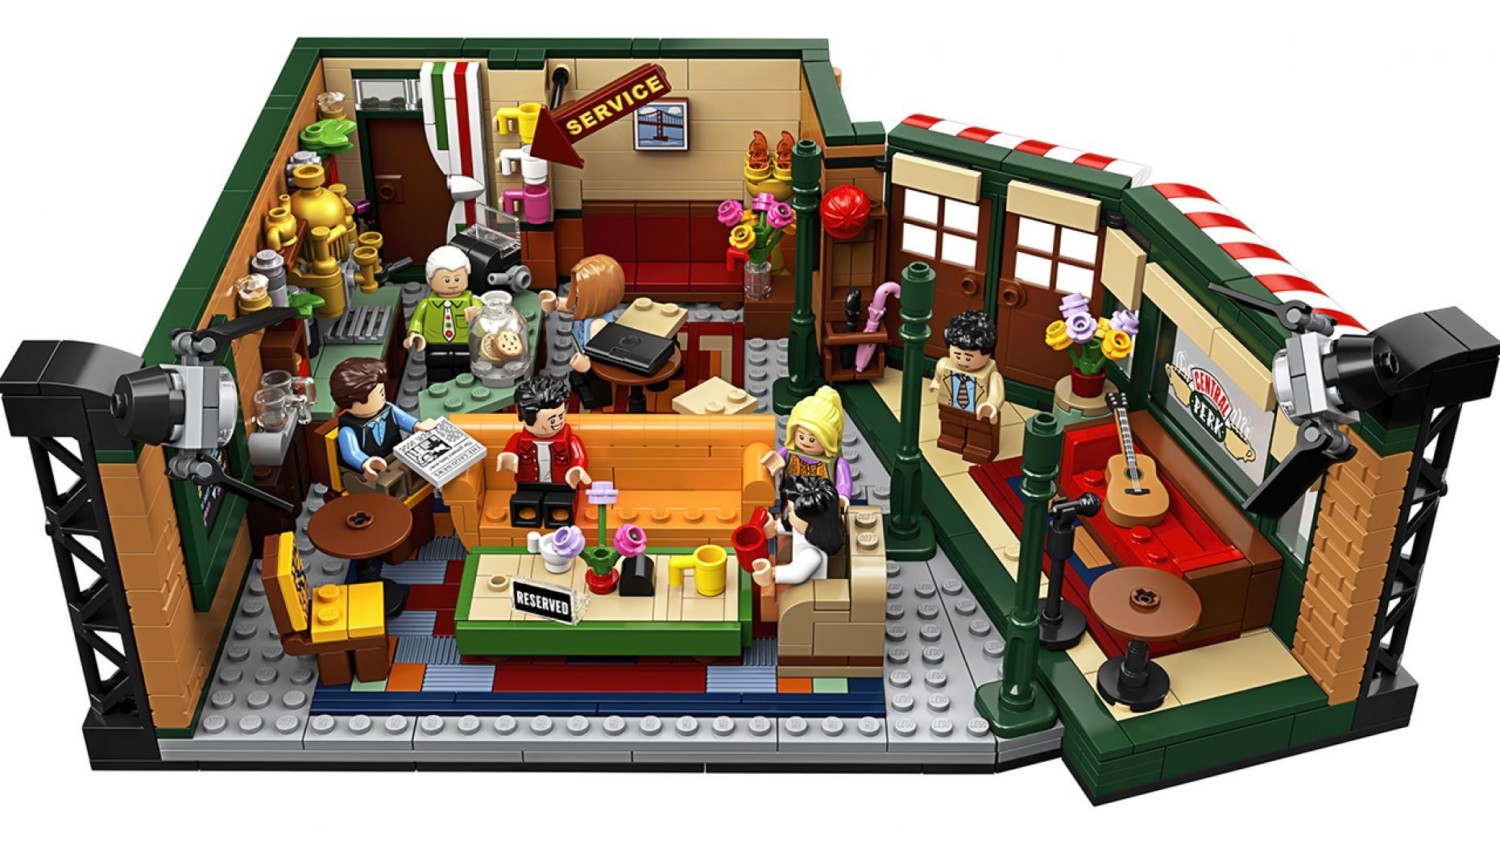 You can get a Lego 'Friends' set in honor of the show's 25th anniversary